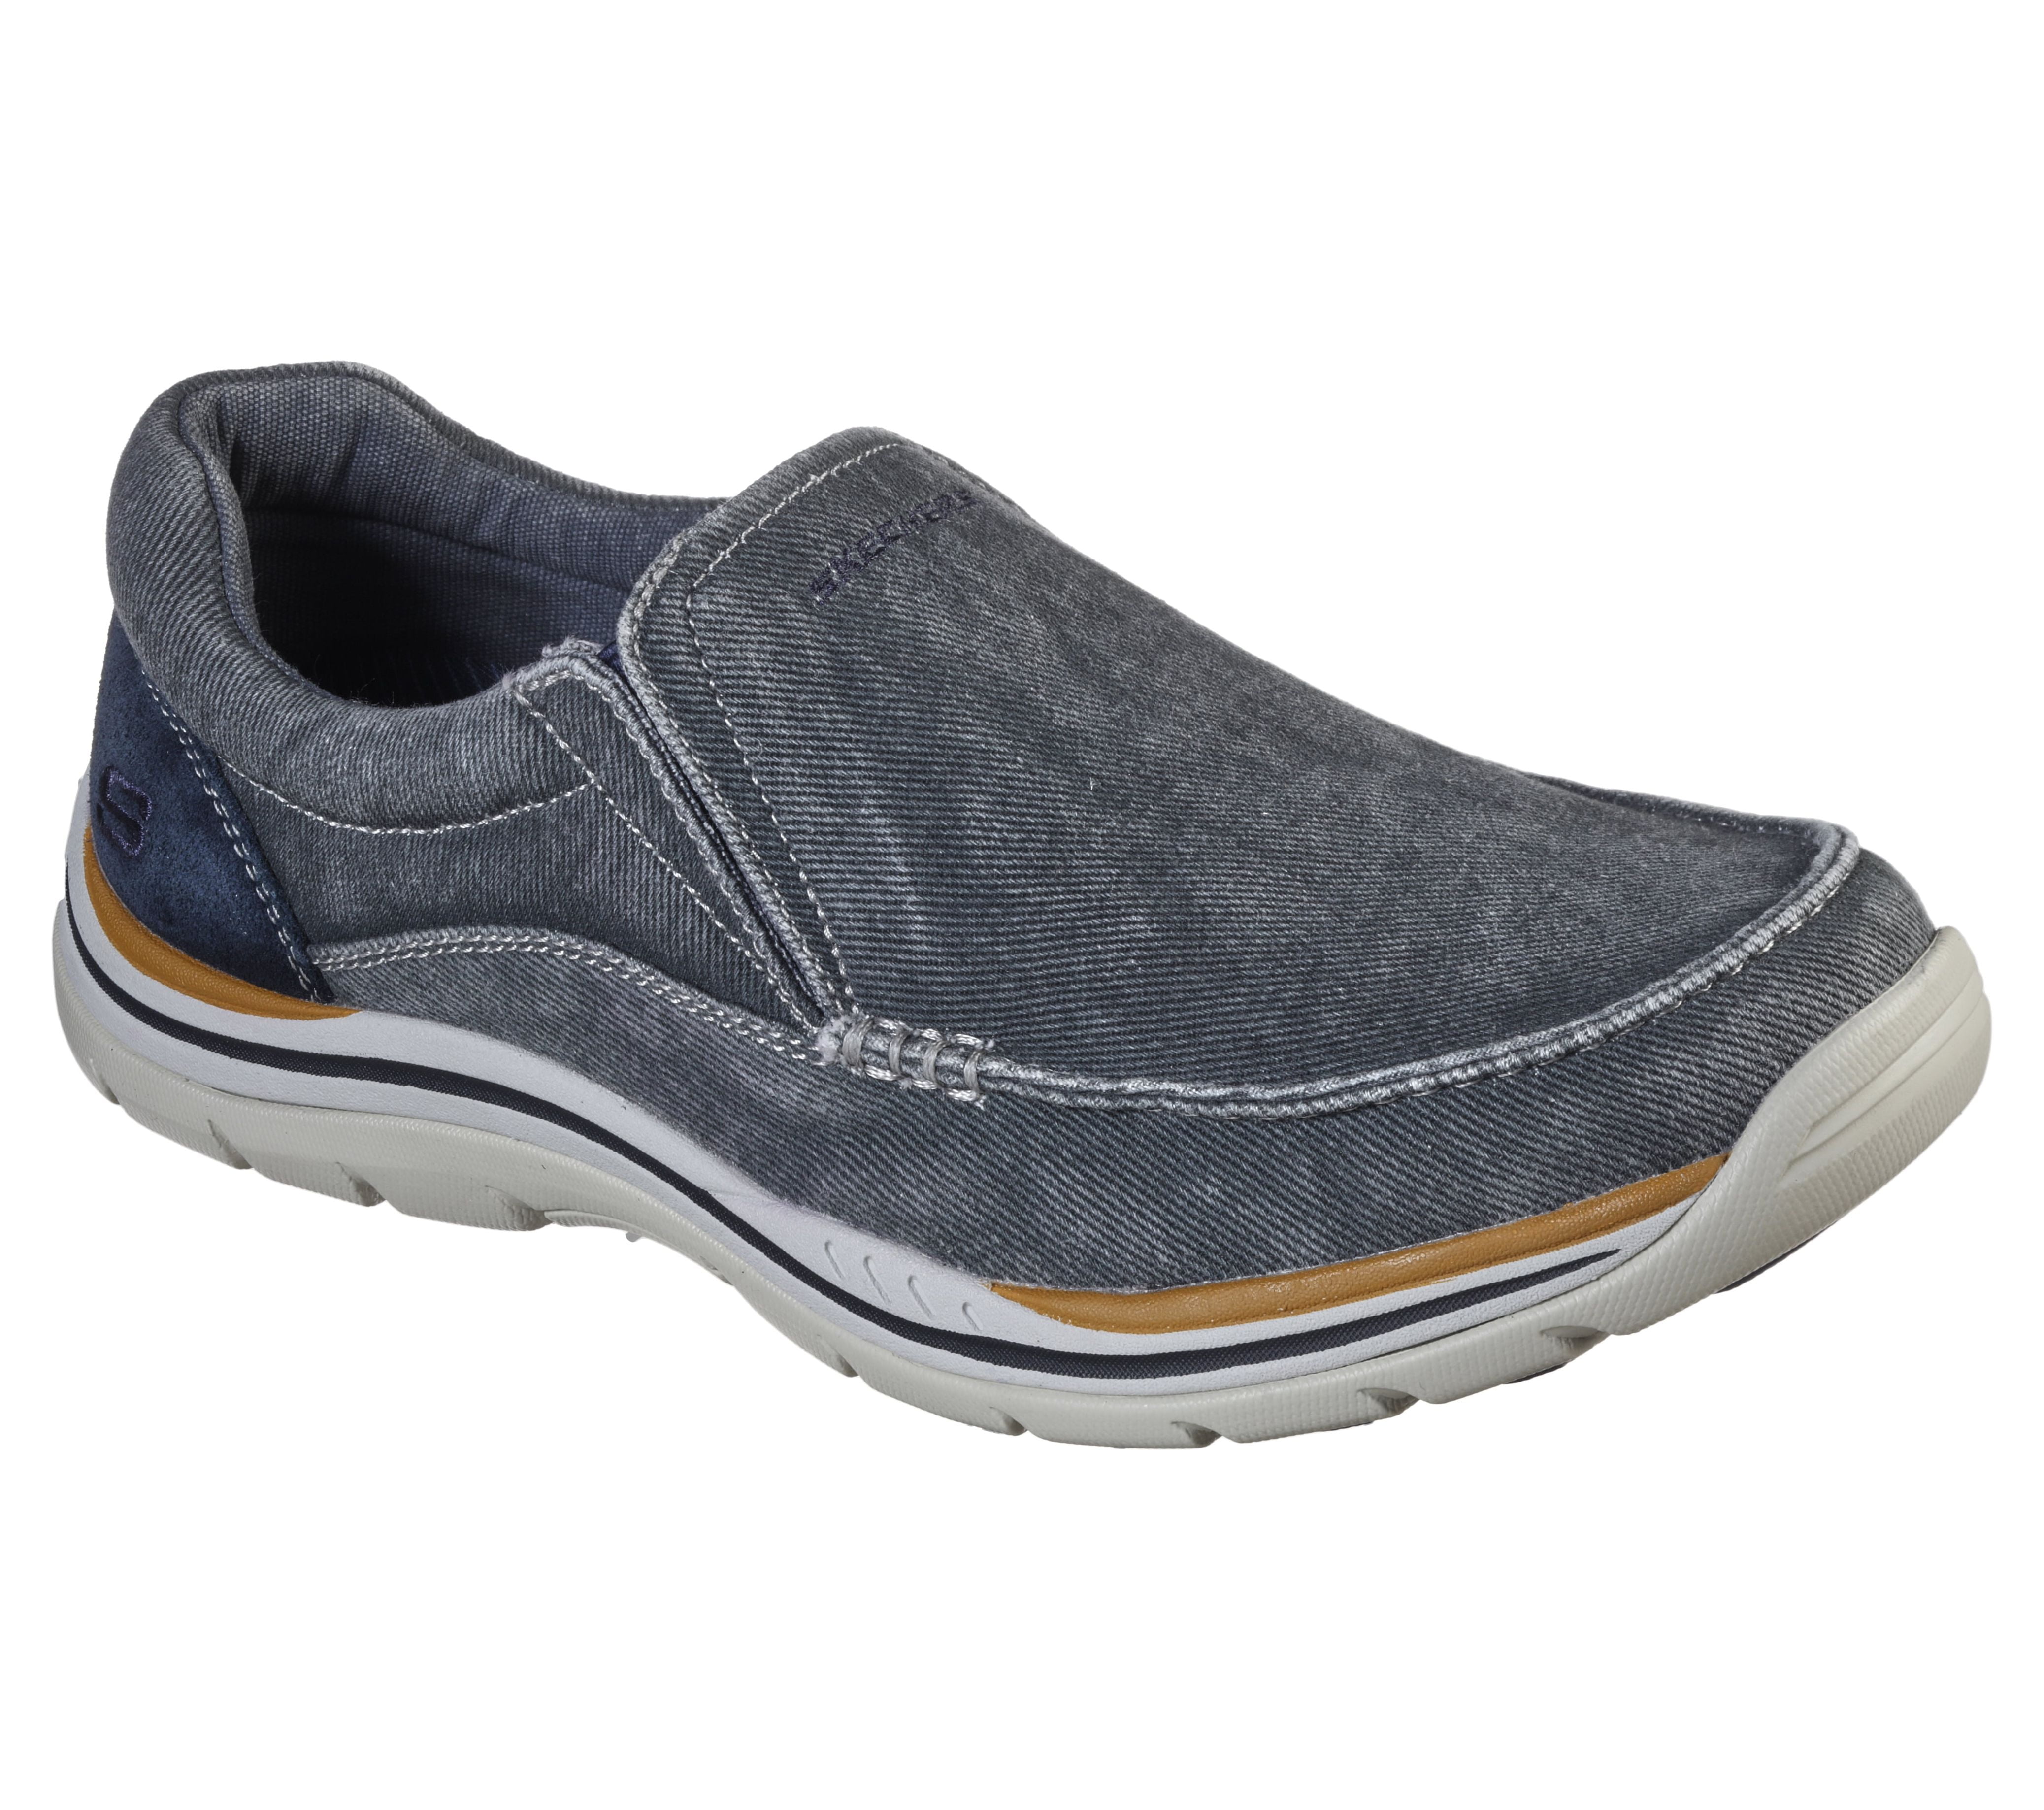 Skechers Men's Relaxed Fit Expected Avillo Casual Slip-on Shoe (Wide ...